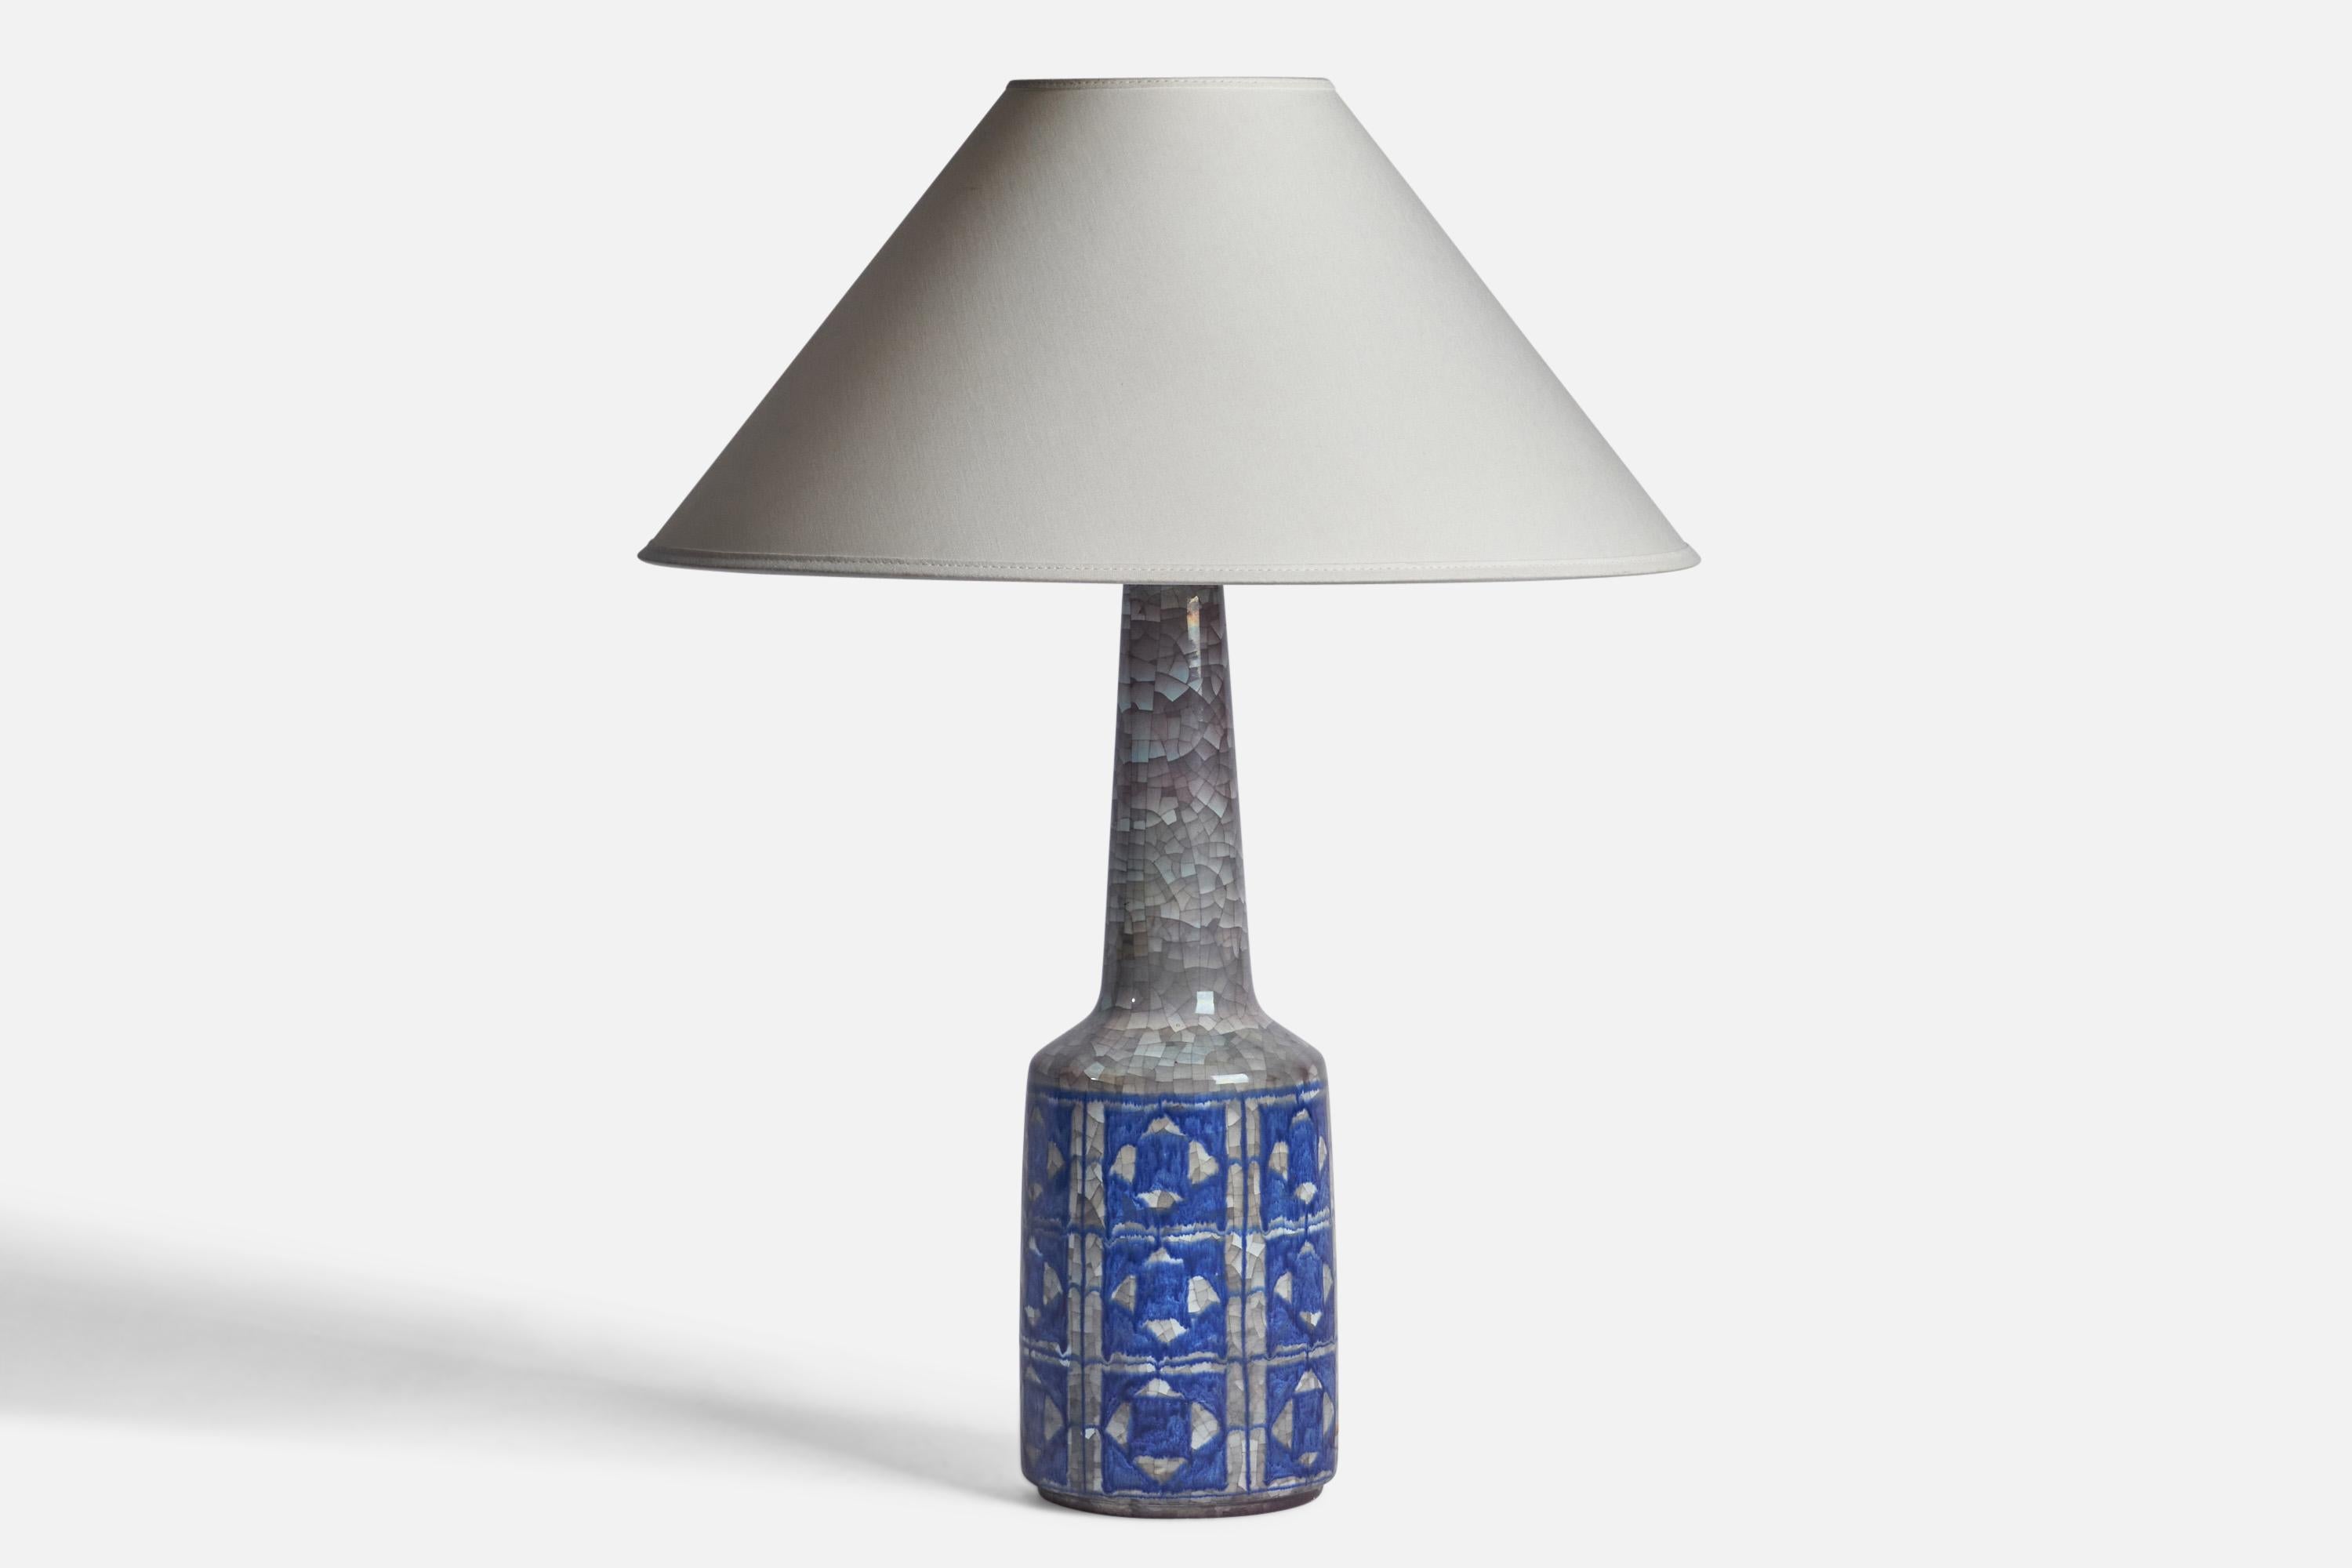 A blue and grey-glazed table lamp designed and produced by Michael Andersen, Denmark, c. 1950s.

Dimensions of Lamp (inches): 16.75” x 5” Diameter
Dimensions of Shade (inches): 4.5” Top Diameter x 16” Bottom Diameter x 7.25” H
Dimensions of Lamp